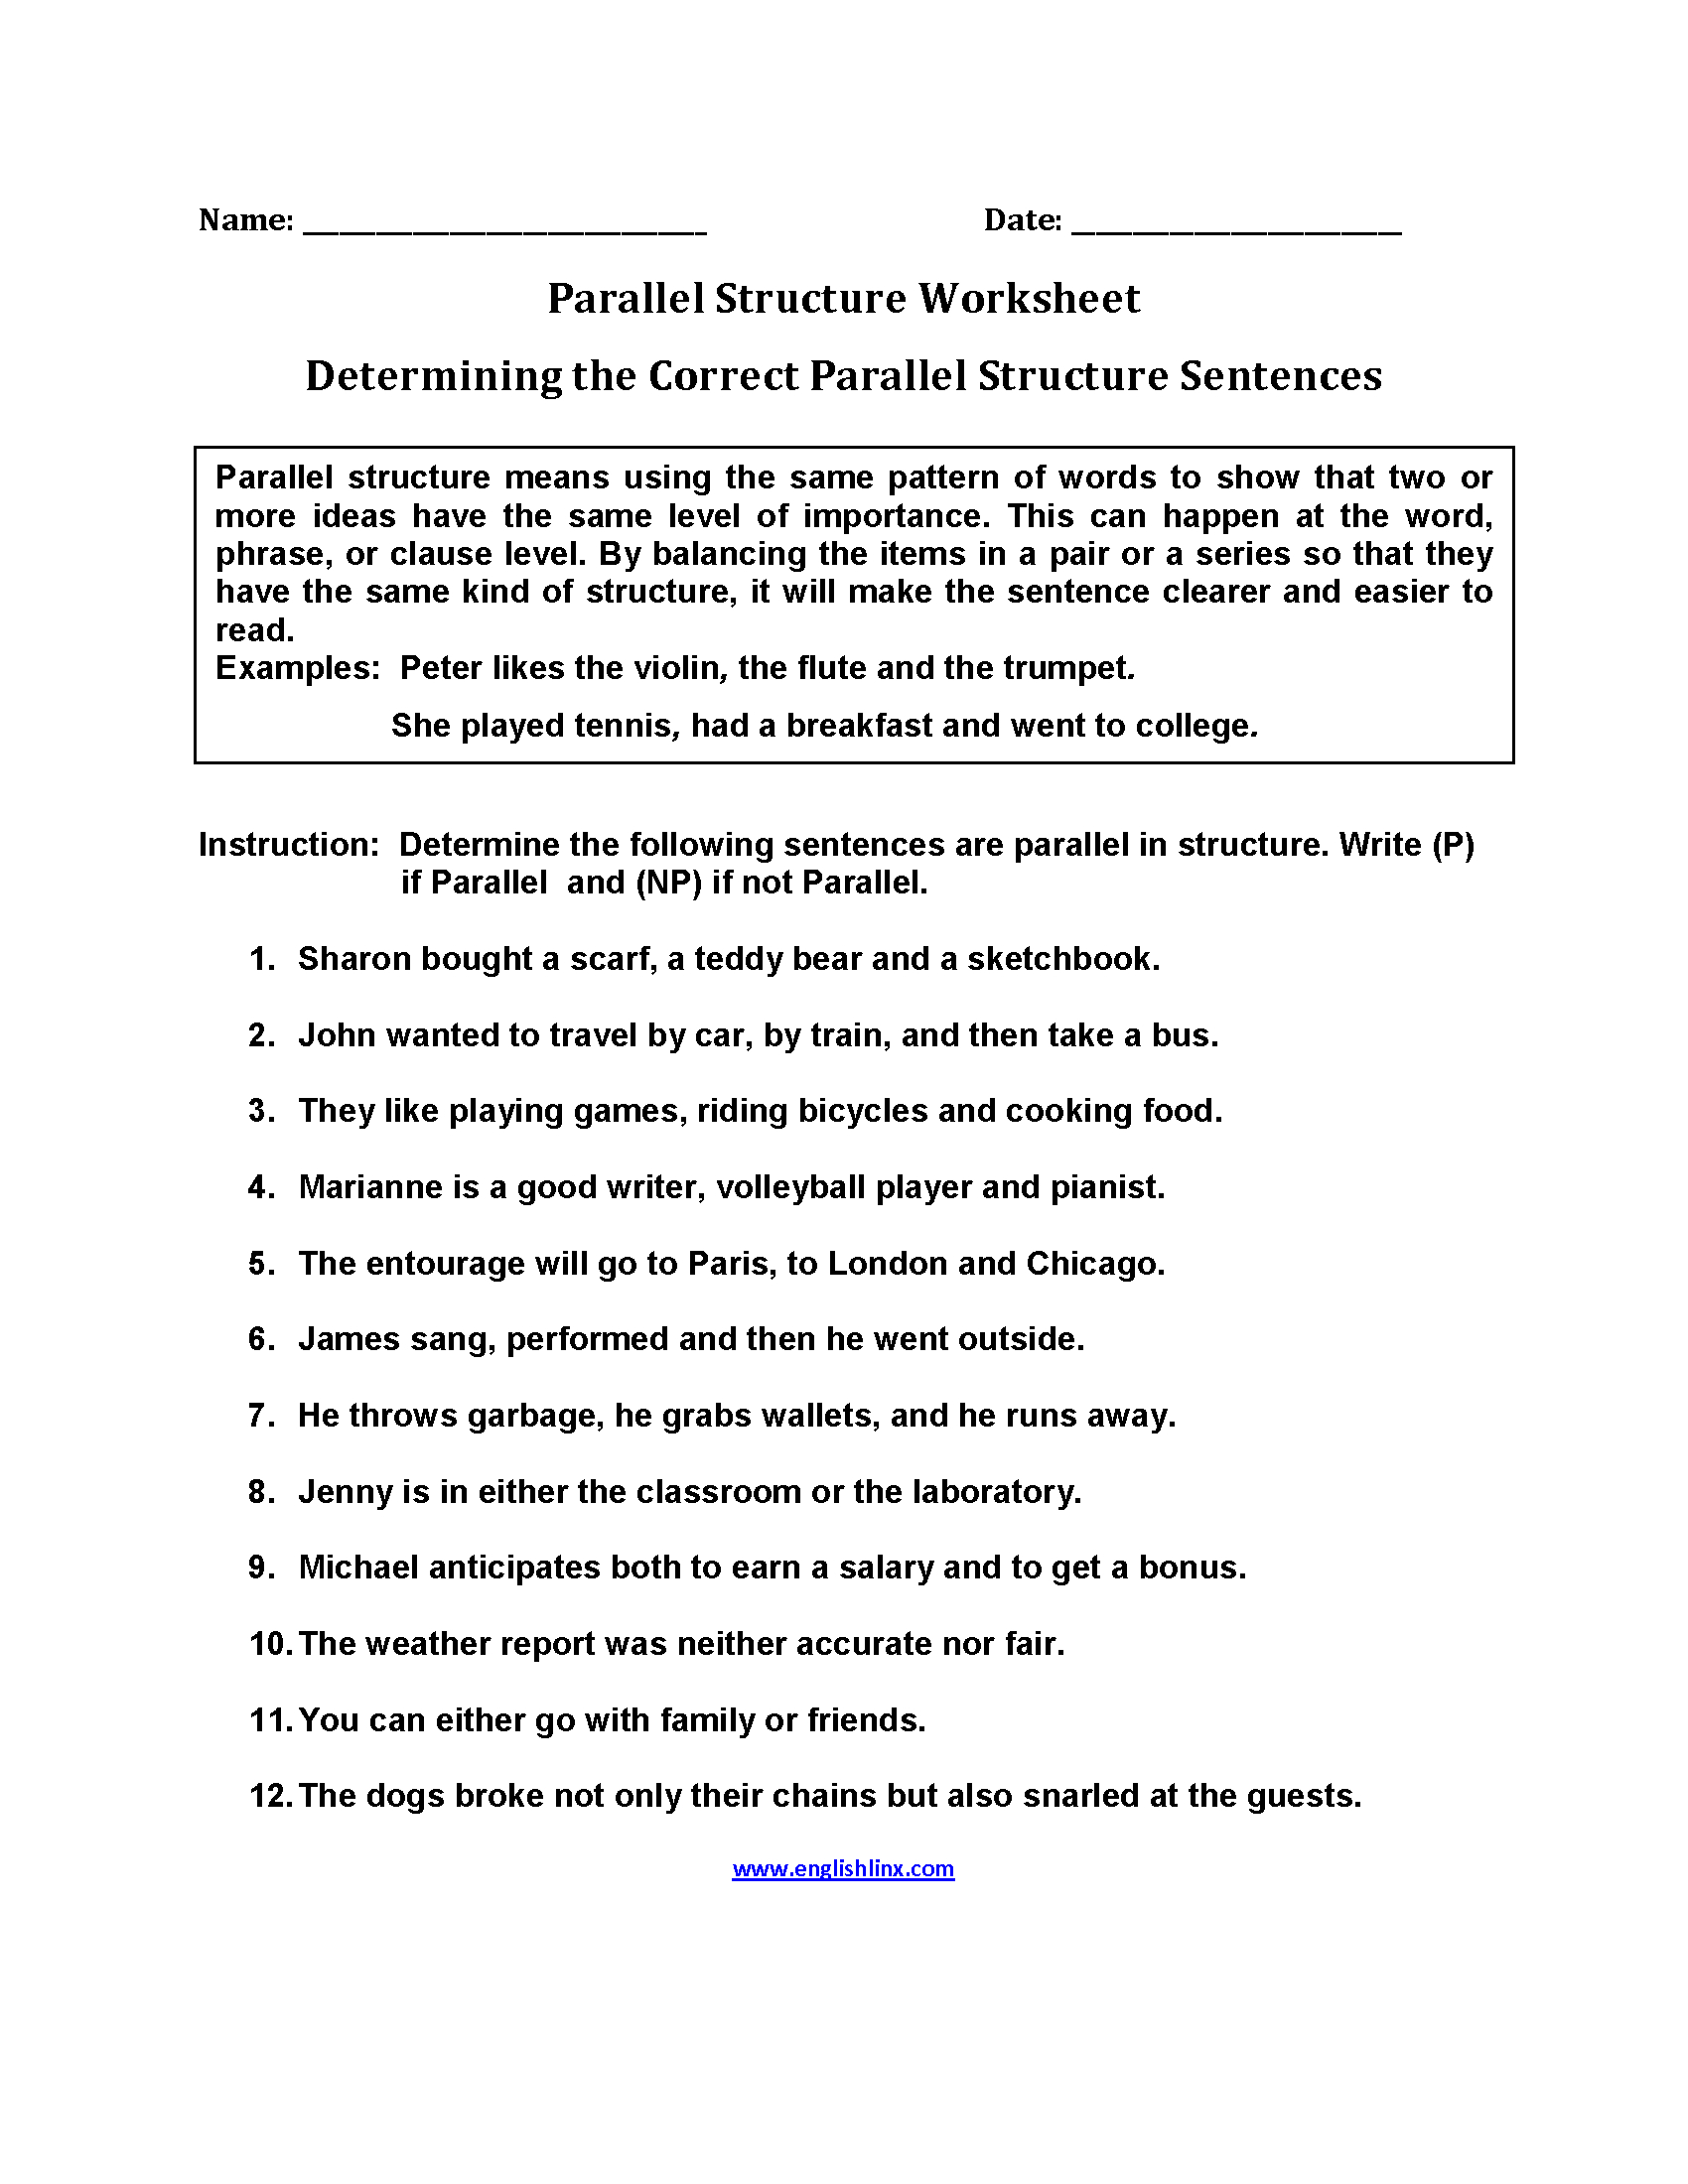 using-parallel-structure-worksheet